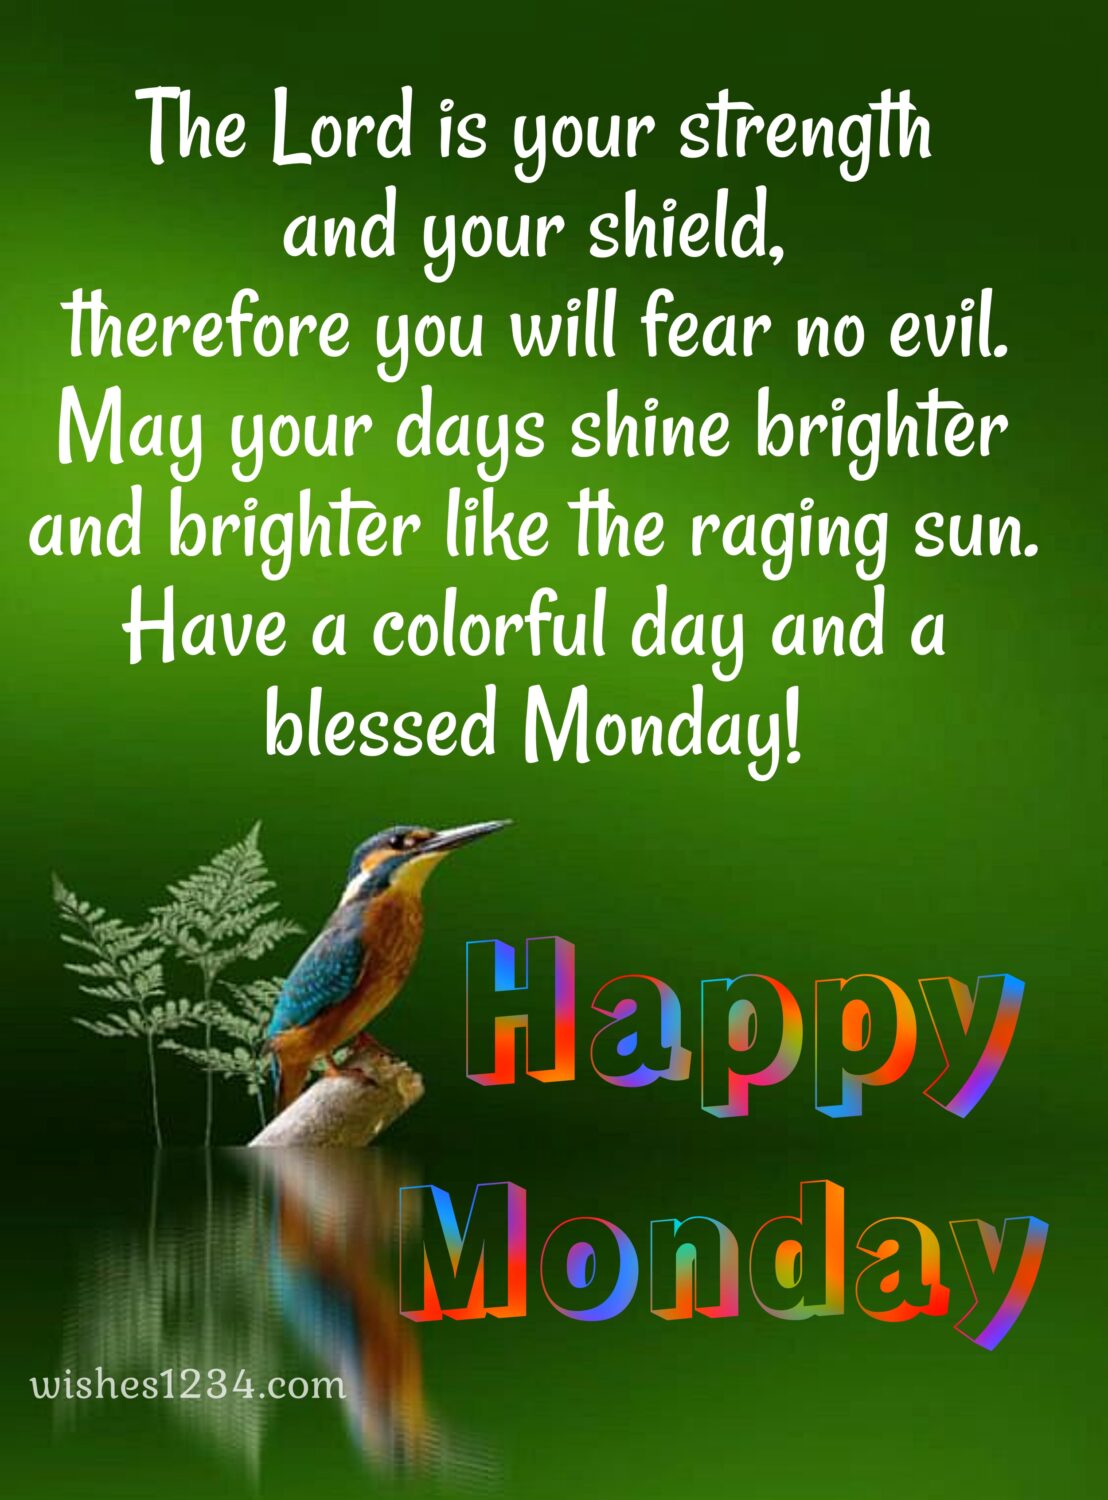 Colourful bird on lake side with monday blessings, Monday blessings | Monday quote.